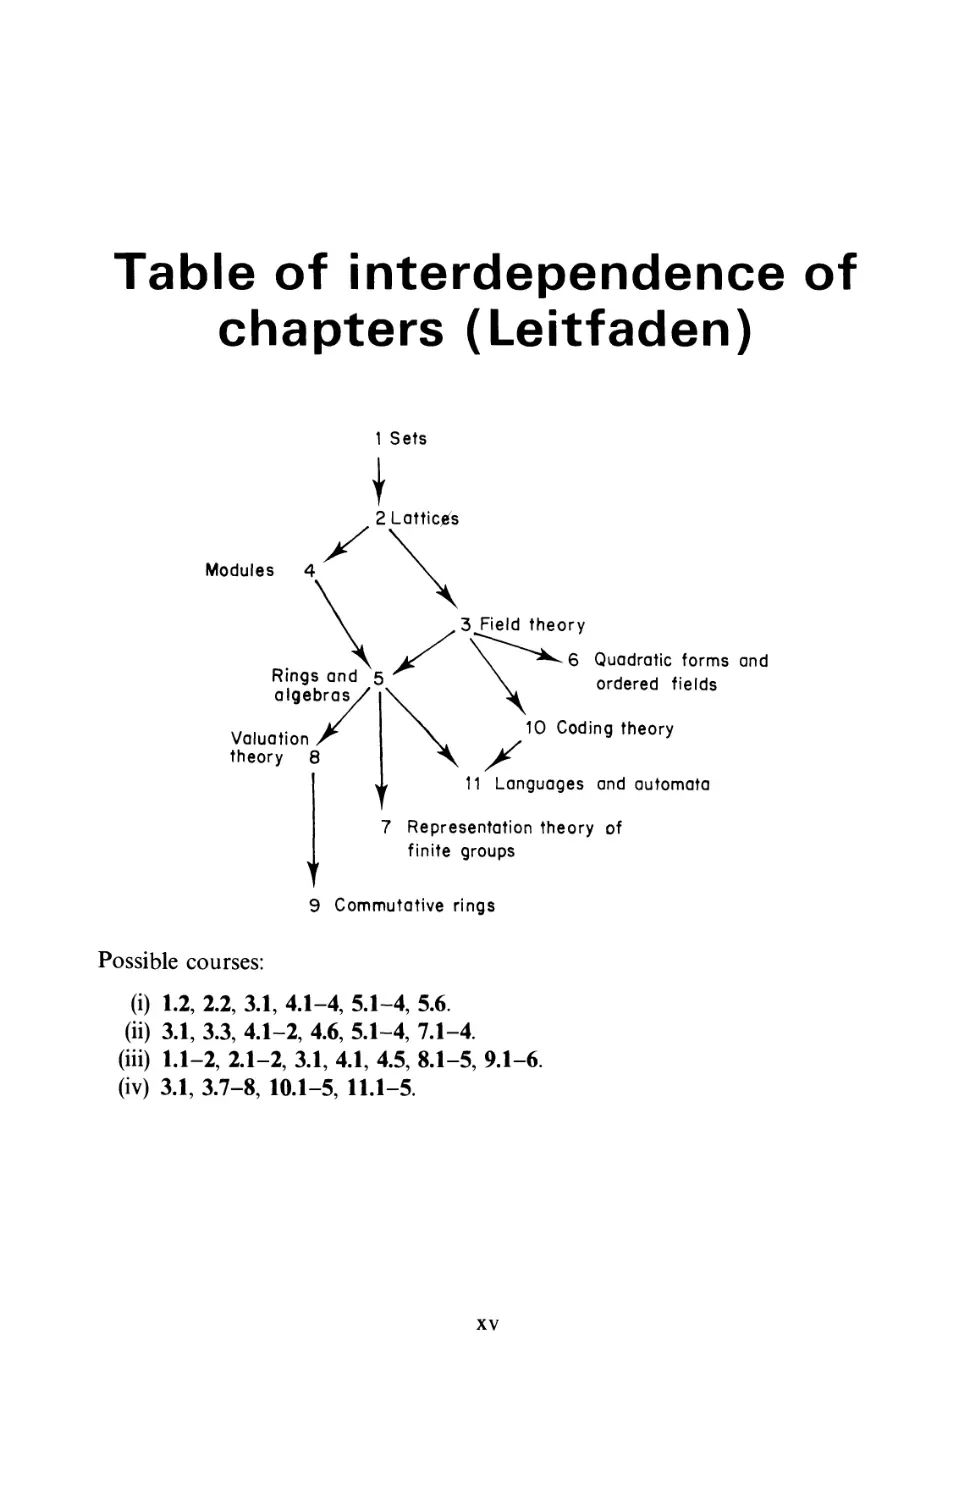 Table of interdependence of chapters